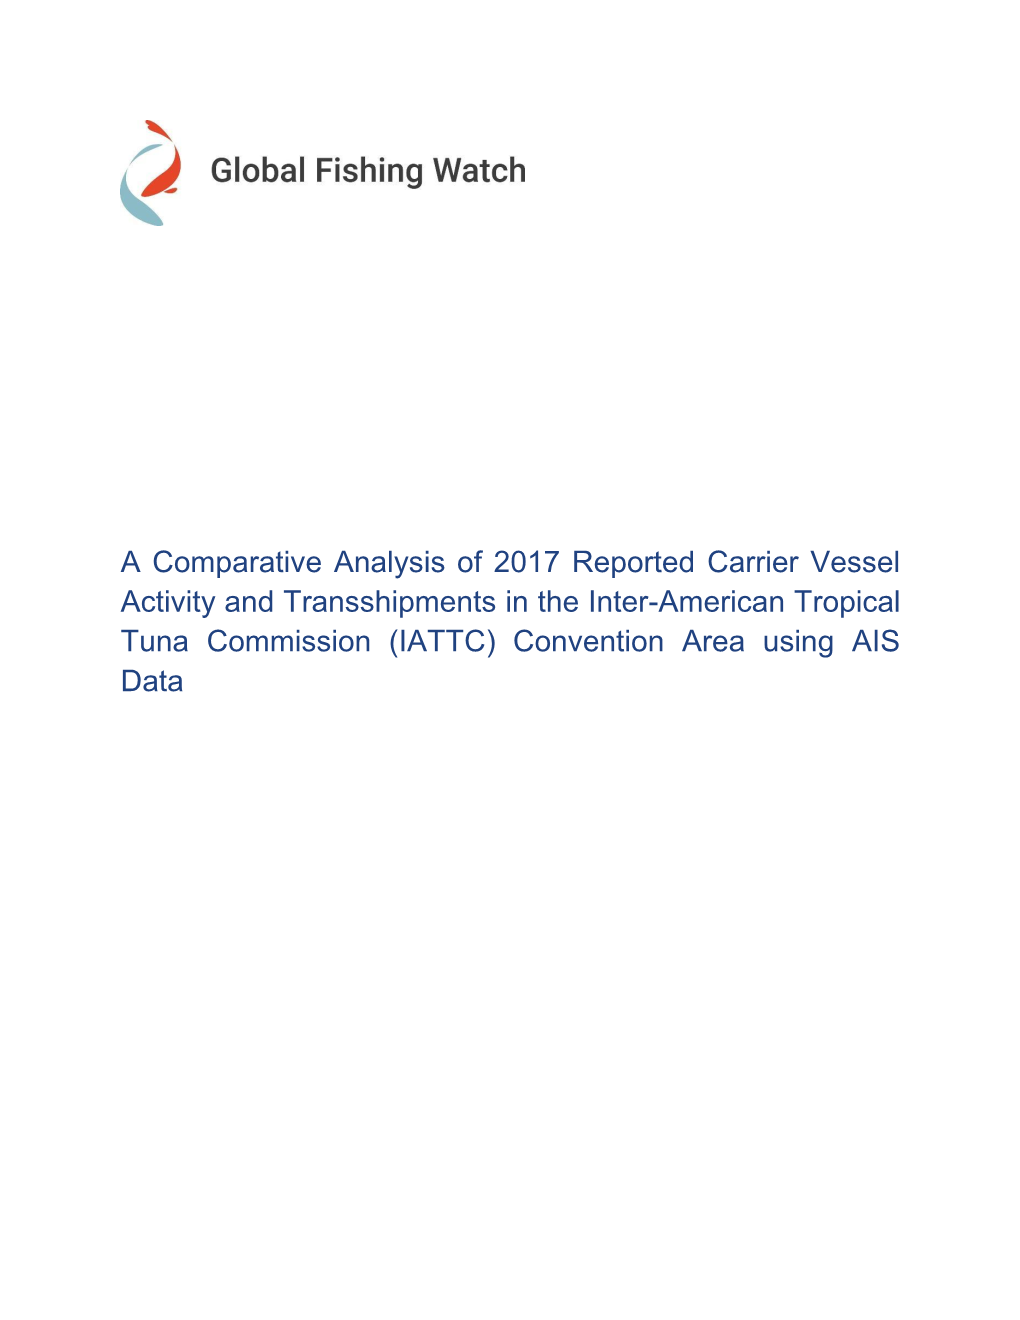 Global Fishing Watch/PEW 2017 Reported Carrier Vessel Activity